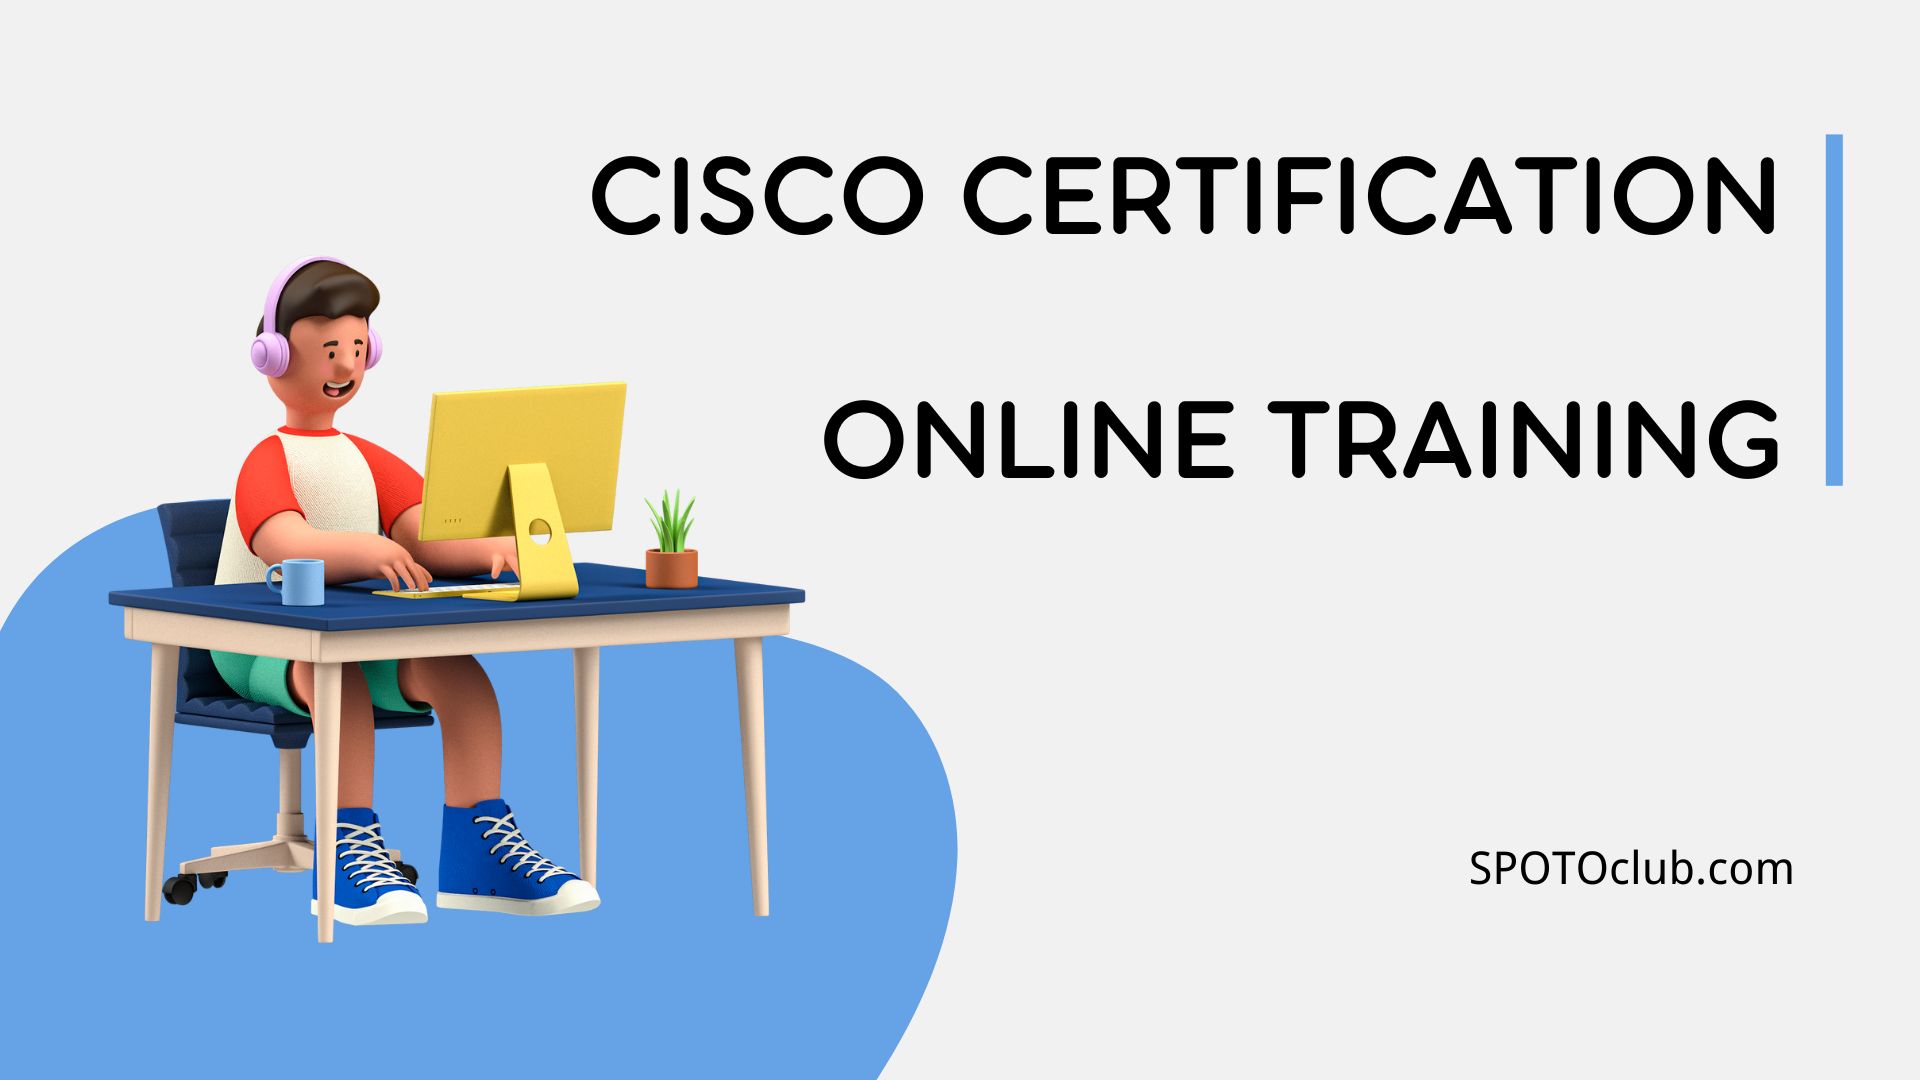 Prepare for and Pass the Cisco CCIE